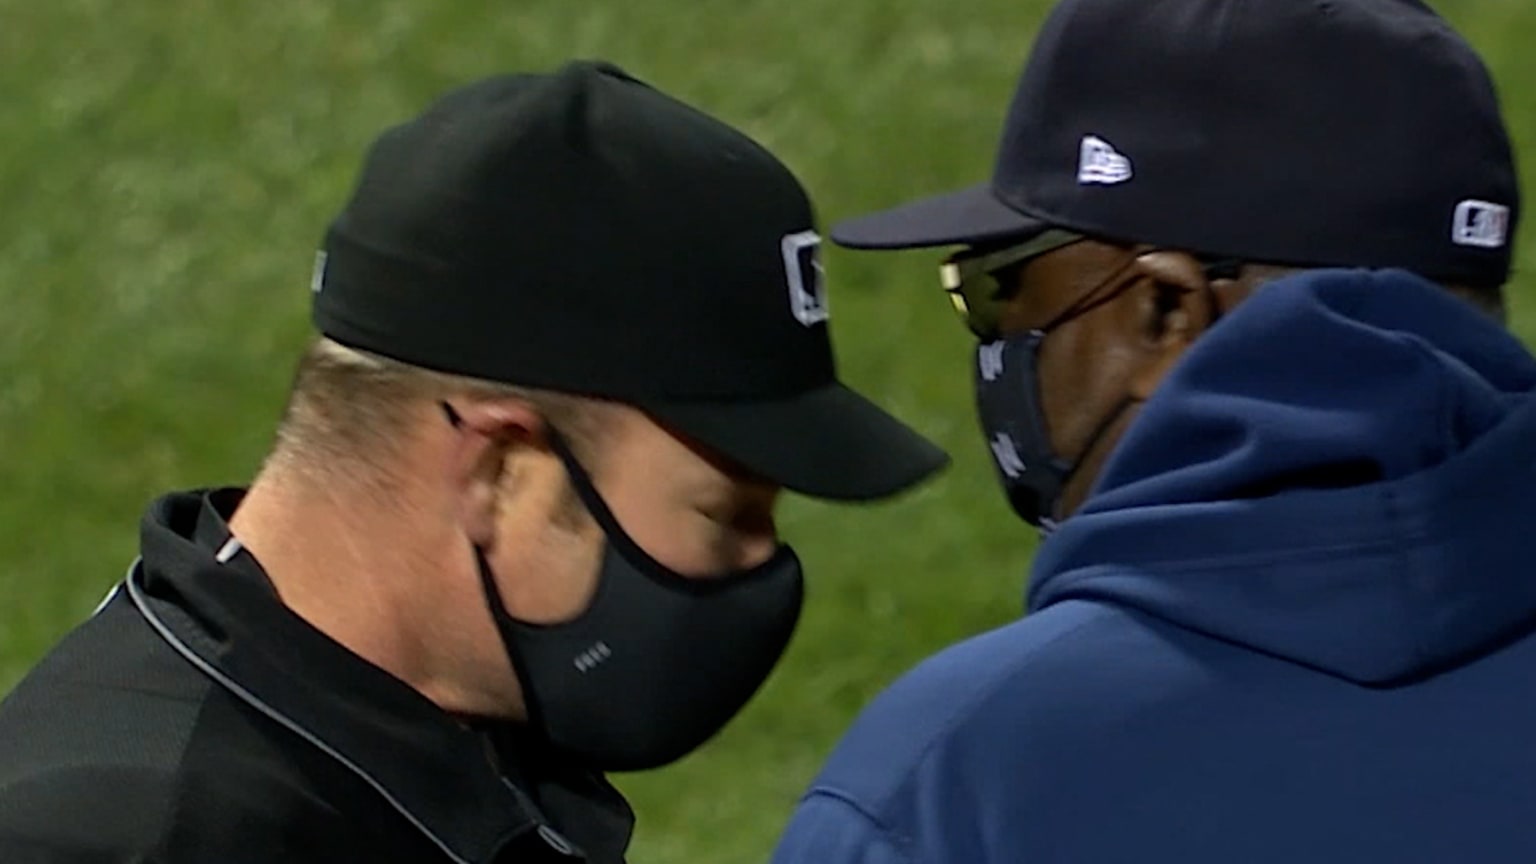 Dusty Baker gets ejected, 06/10/2021